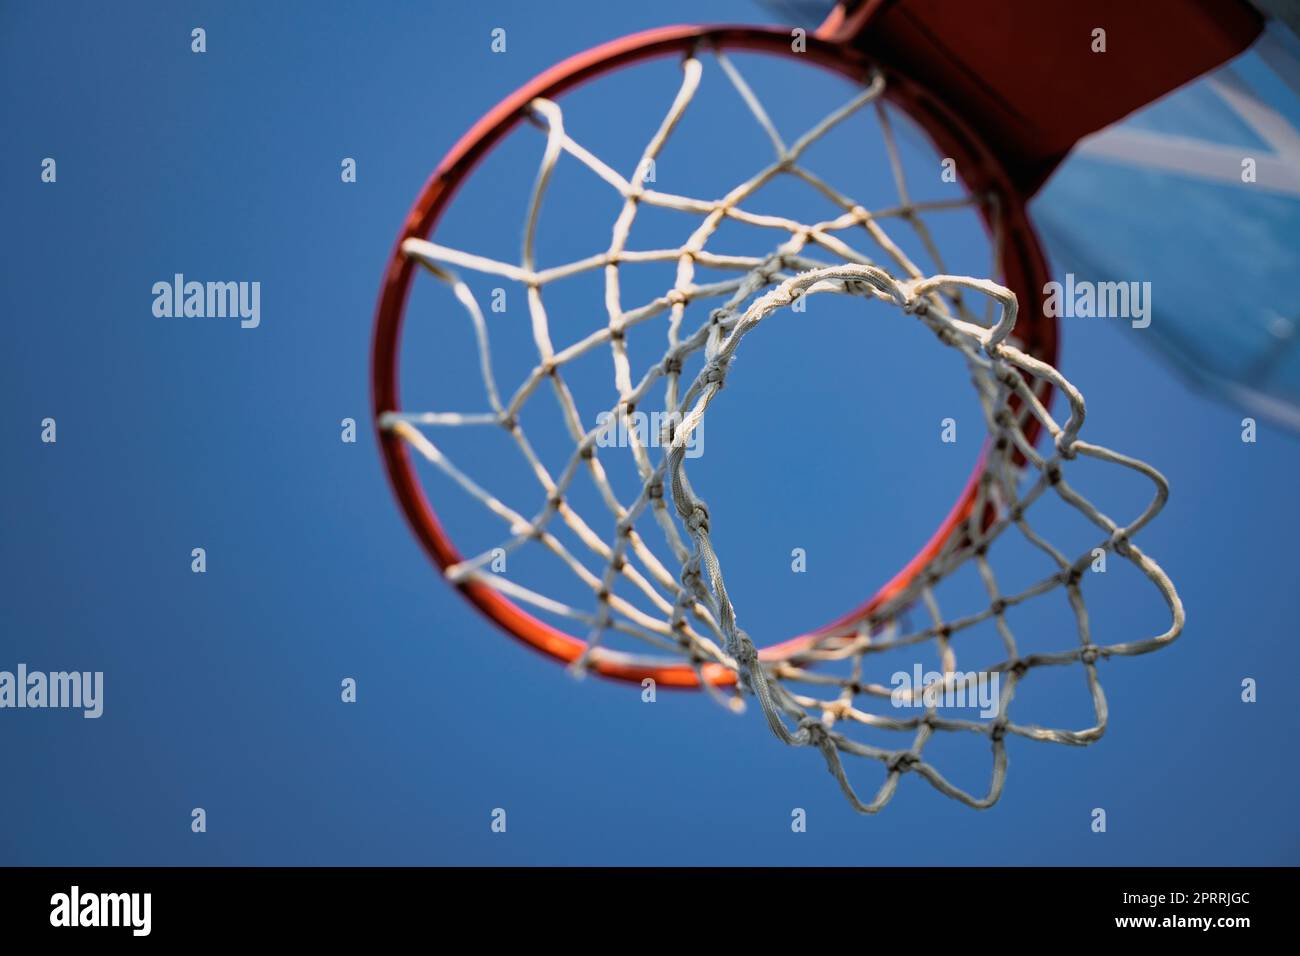 closeup of basketball basket net of white rope view from underneath against a blue sky Stock Photo